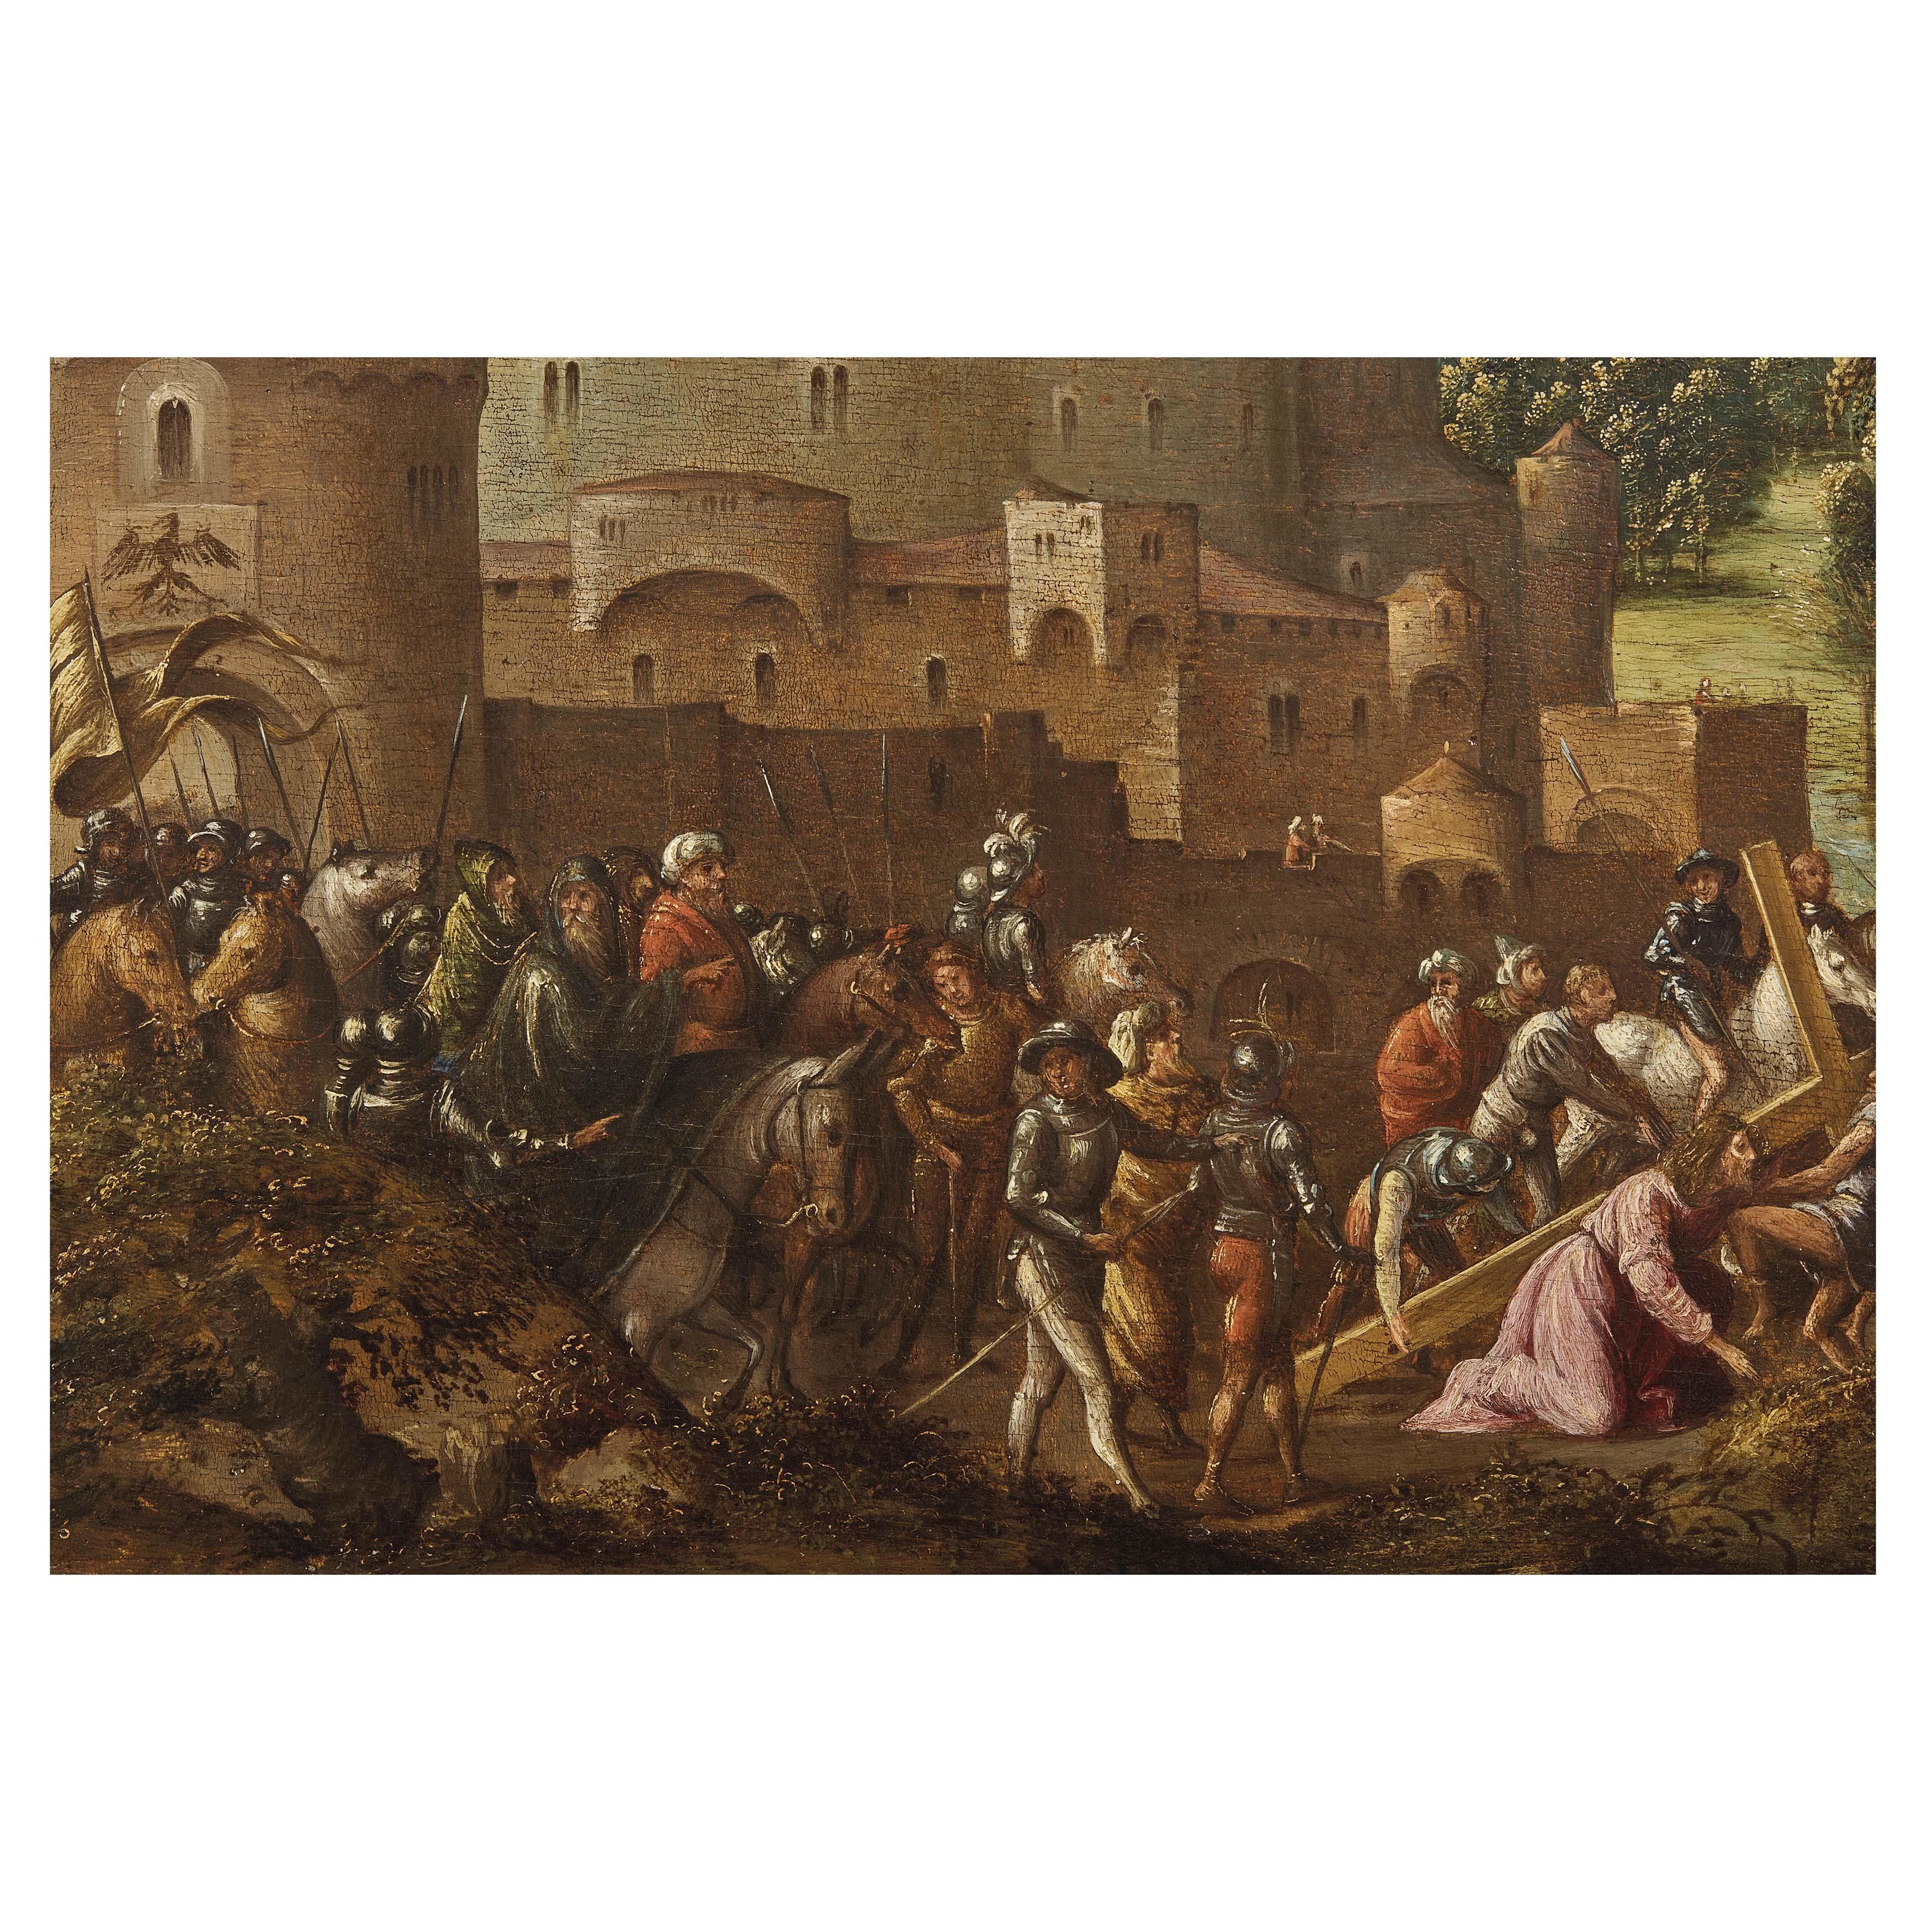 Artwork by Marcello Fogolino, CHRIST ON THE ROAD TO CALVARY, Made of oil on panel